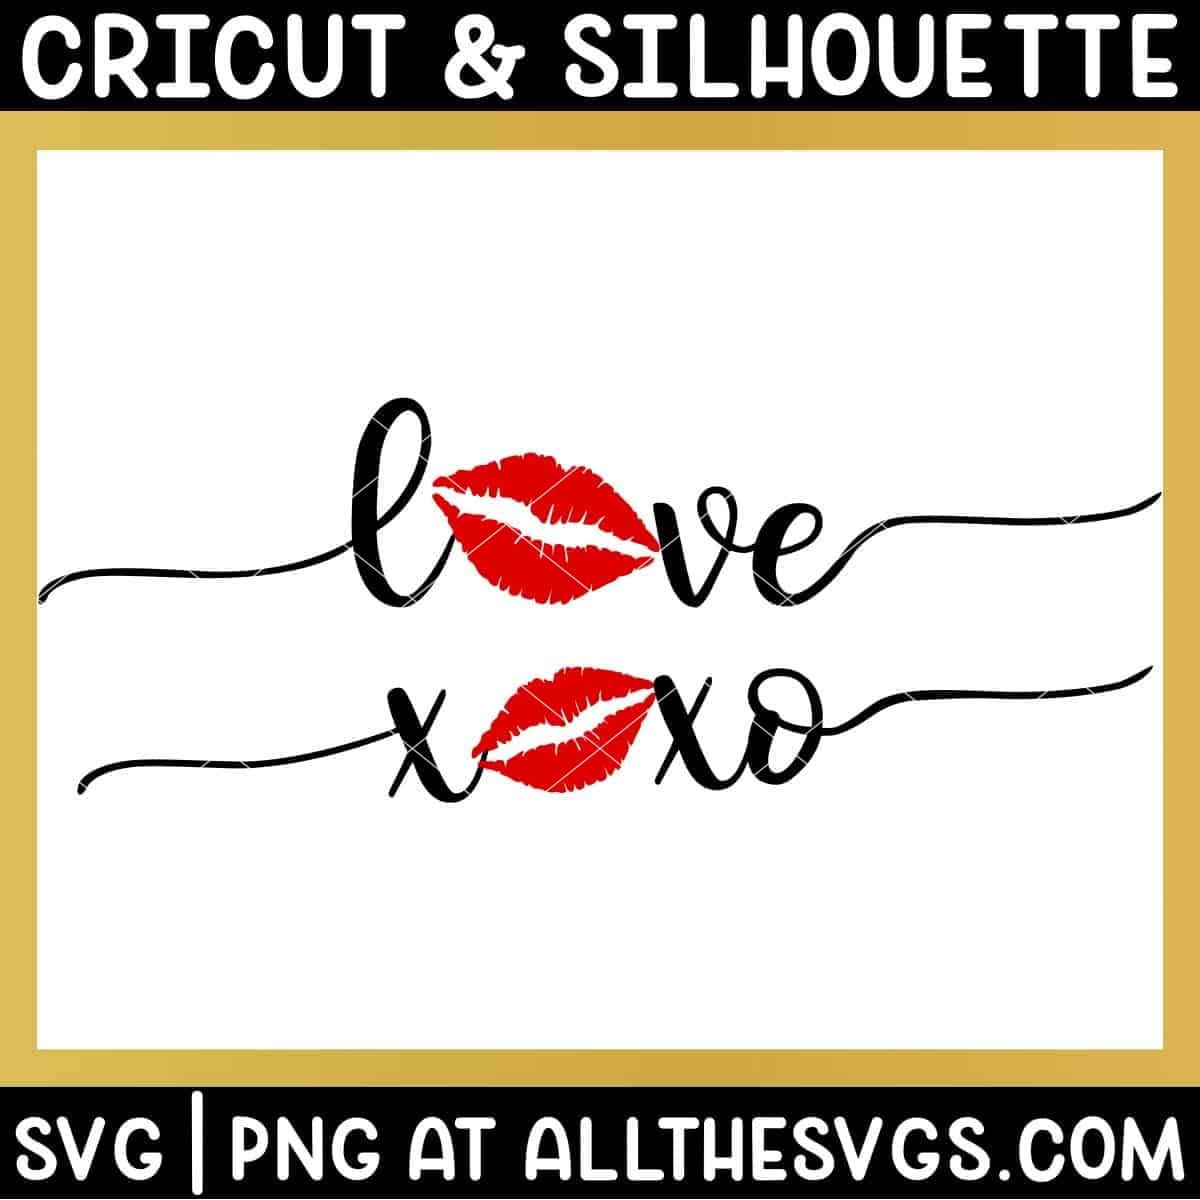 cursive valentine phrases with lips in place of o in love, xoxo.